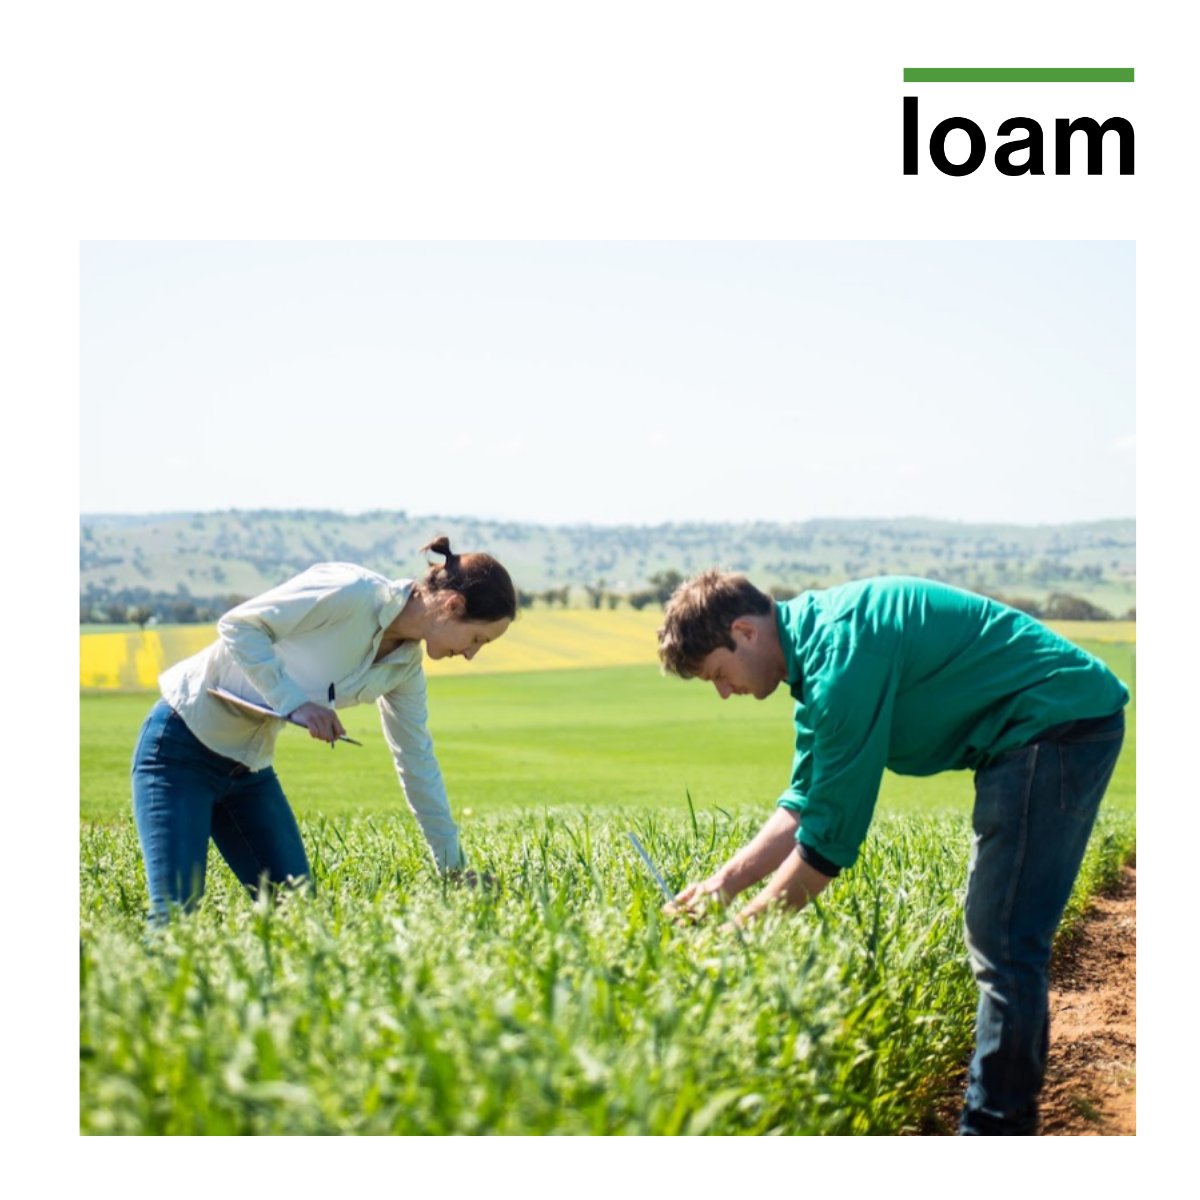 Loam has a great new role in our on-farm trial program. You'll be working with R&D leaders, research agronomists and product managers to demonstrate and deliver impactful carbon sequestration products for farmers. Join us! 🇦🇺👉 ow.ly/aX6Y50HTY4k